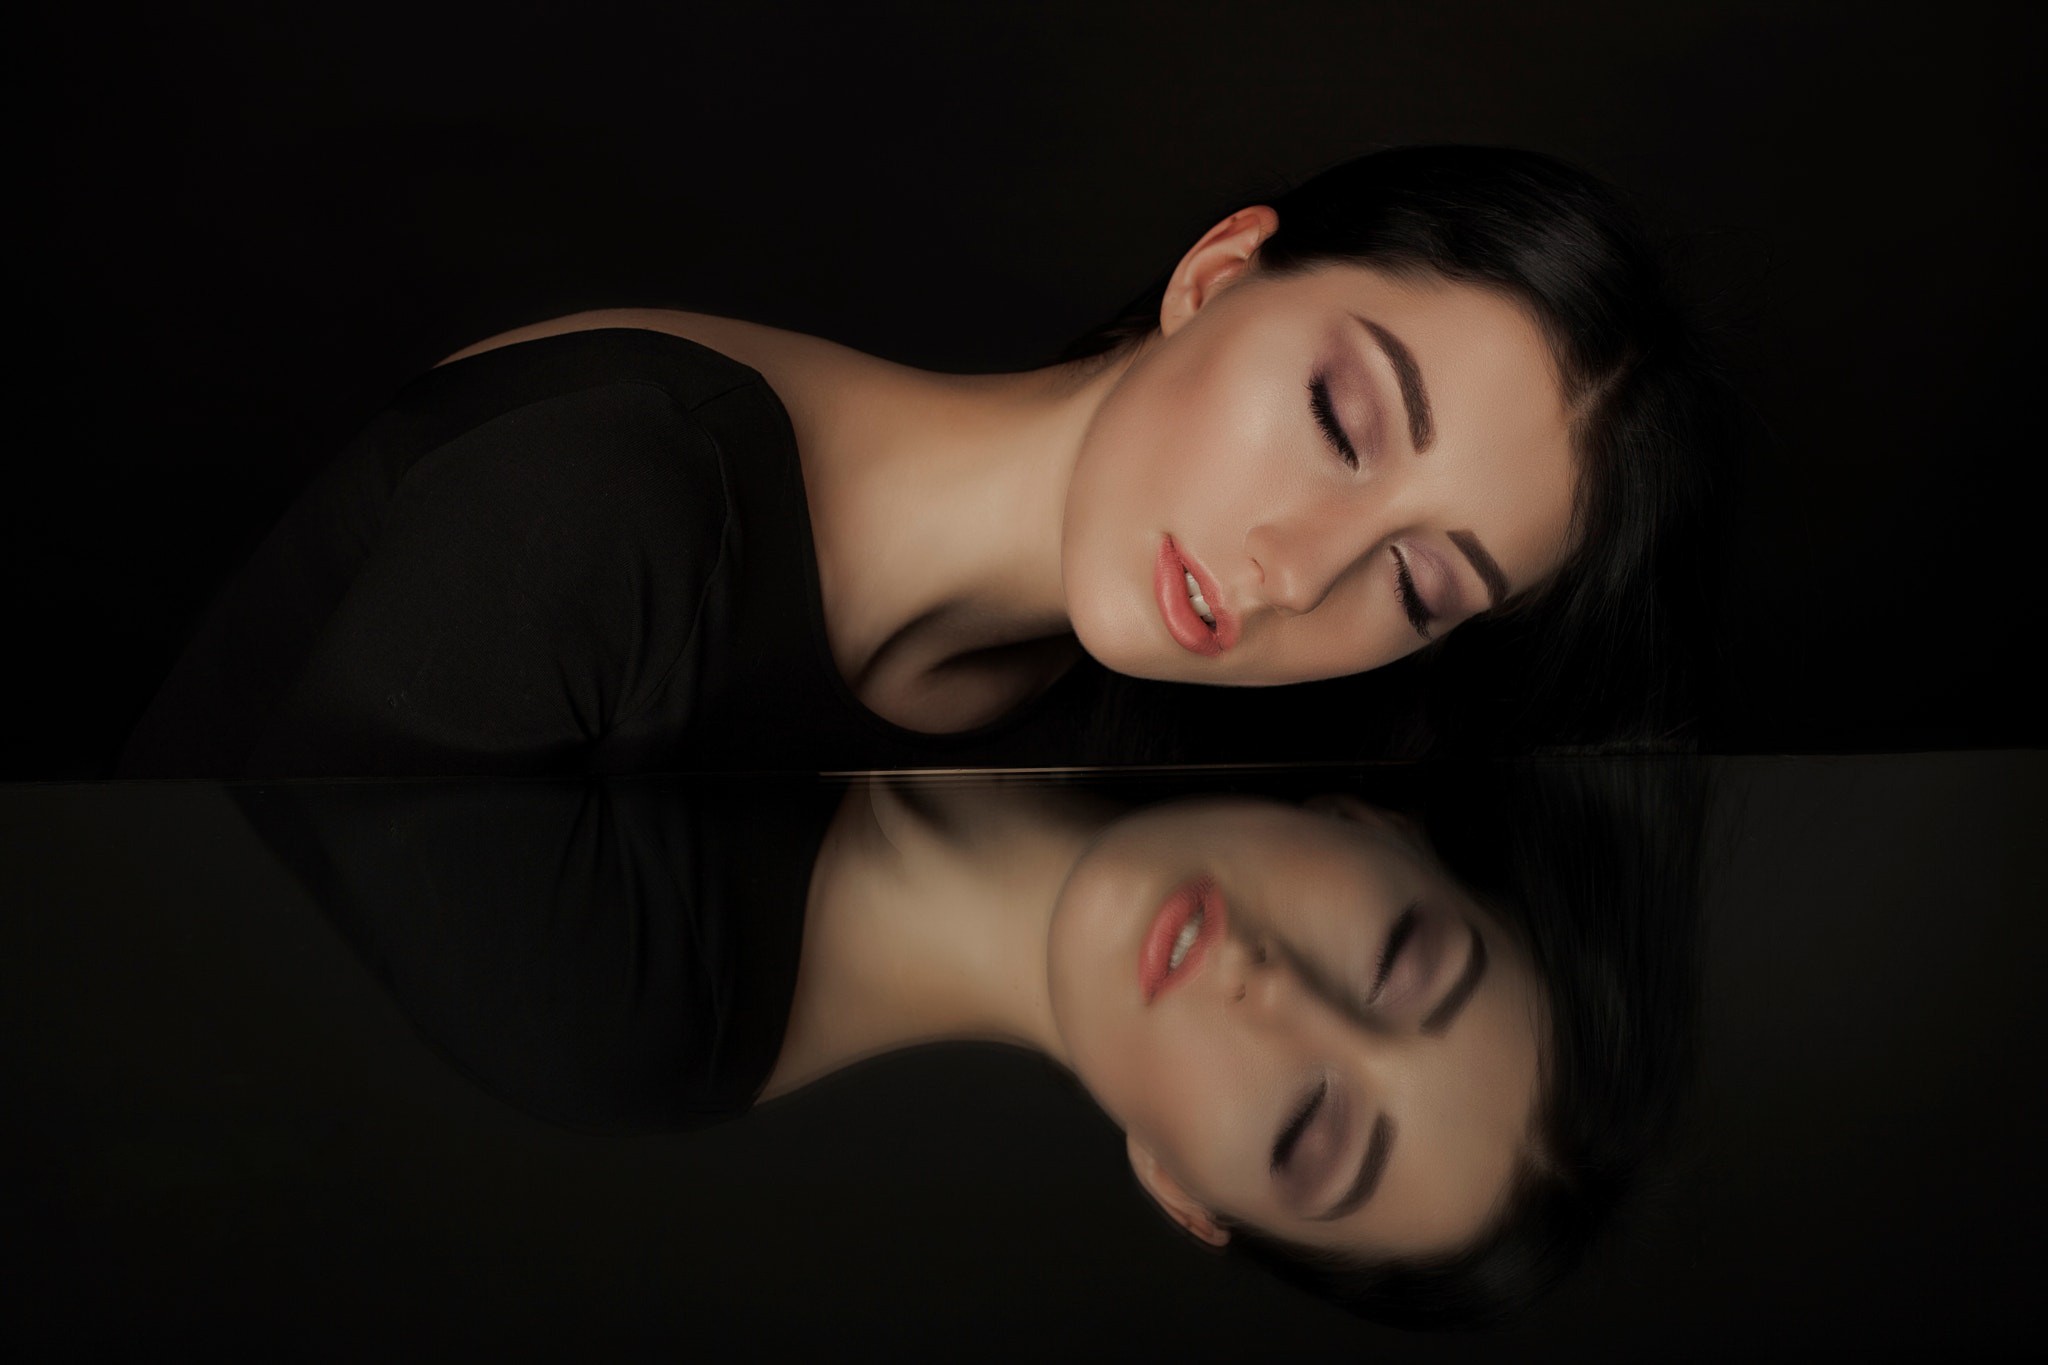 People 2048x1365 women face closed eyes reflection black background